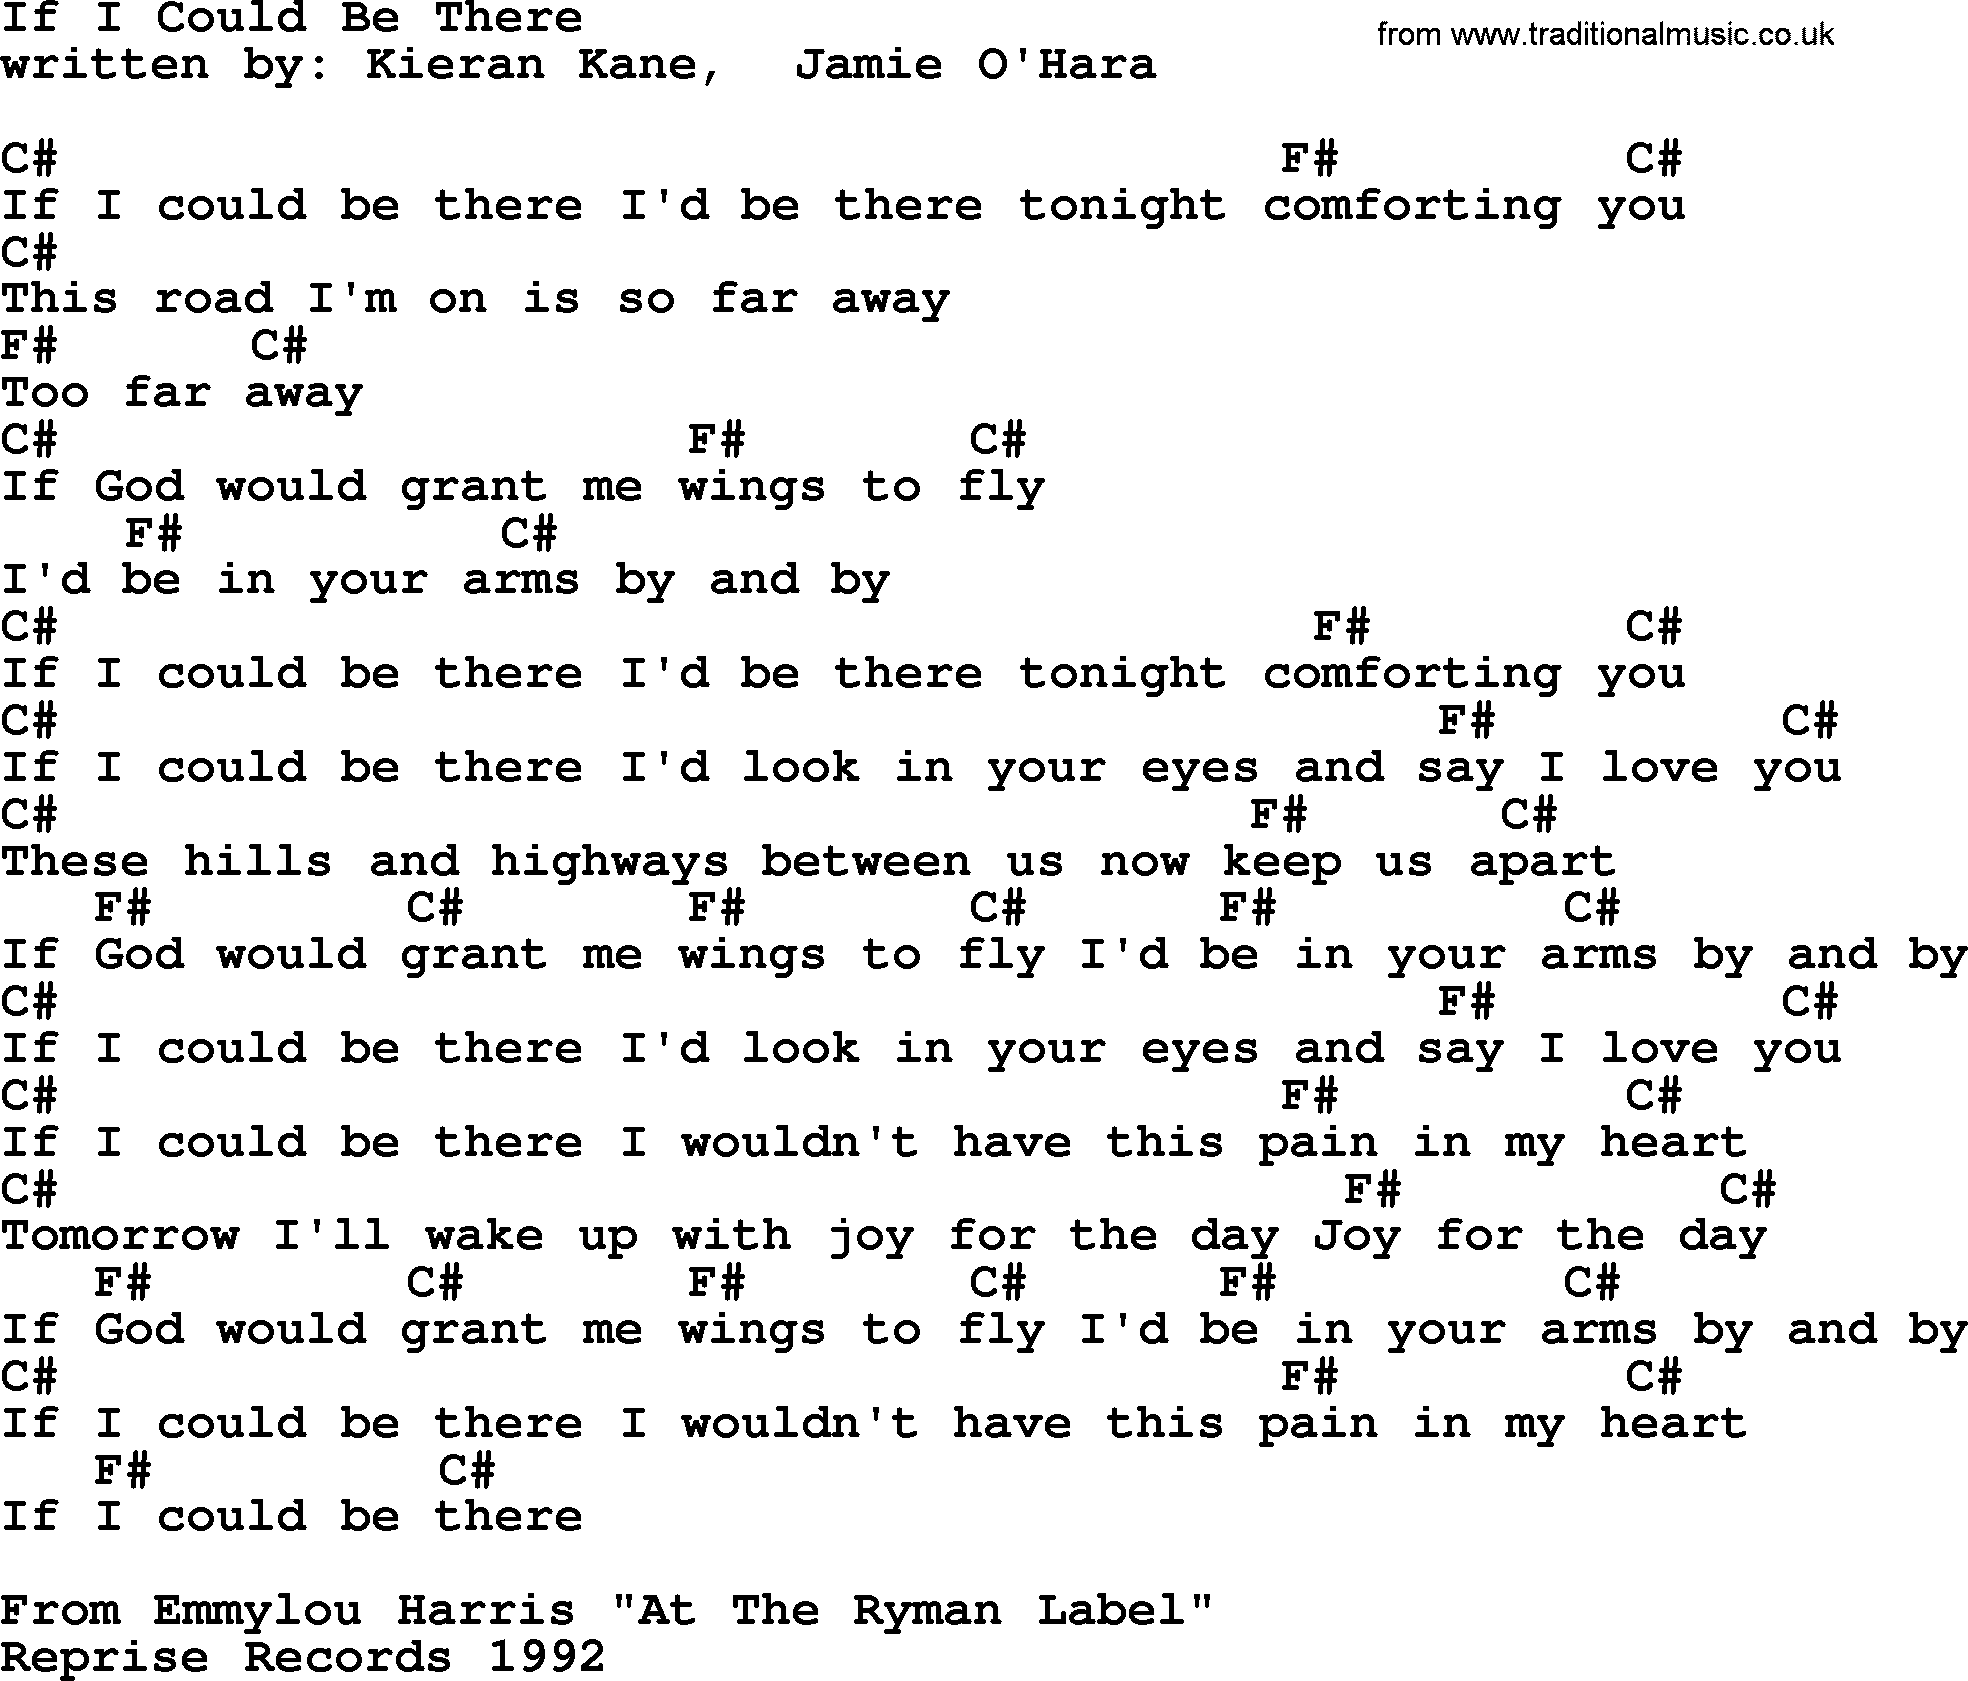 Emmylou Harris song: If I Could Be There lyrics and chords